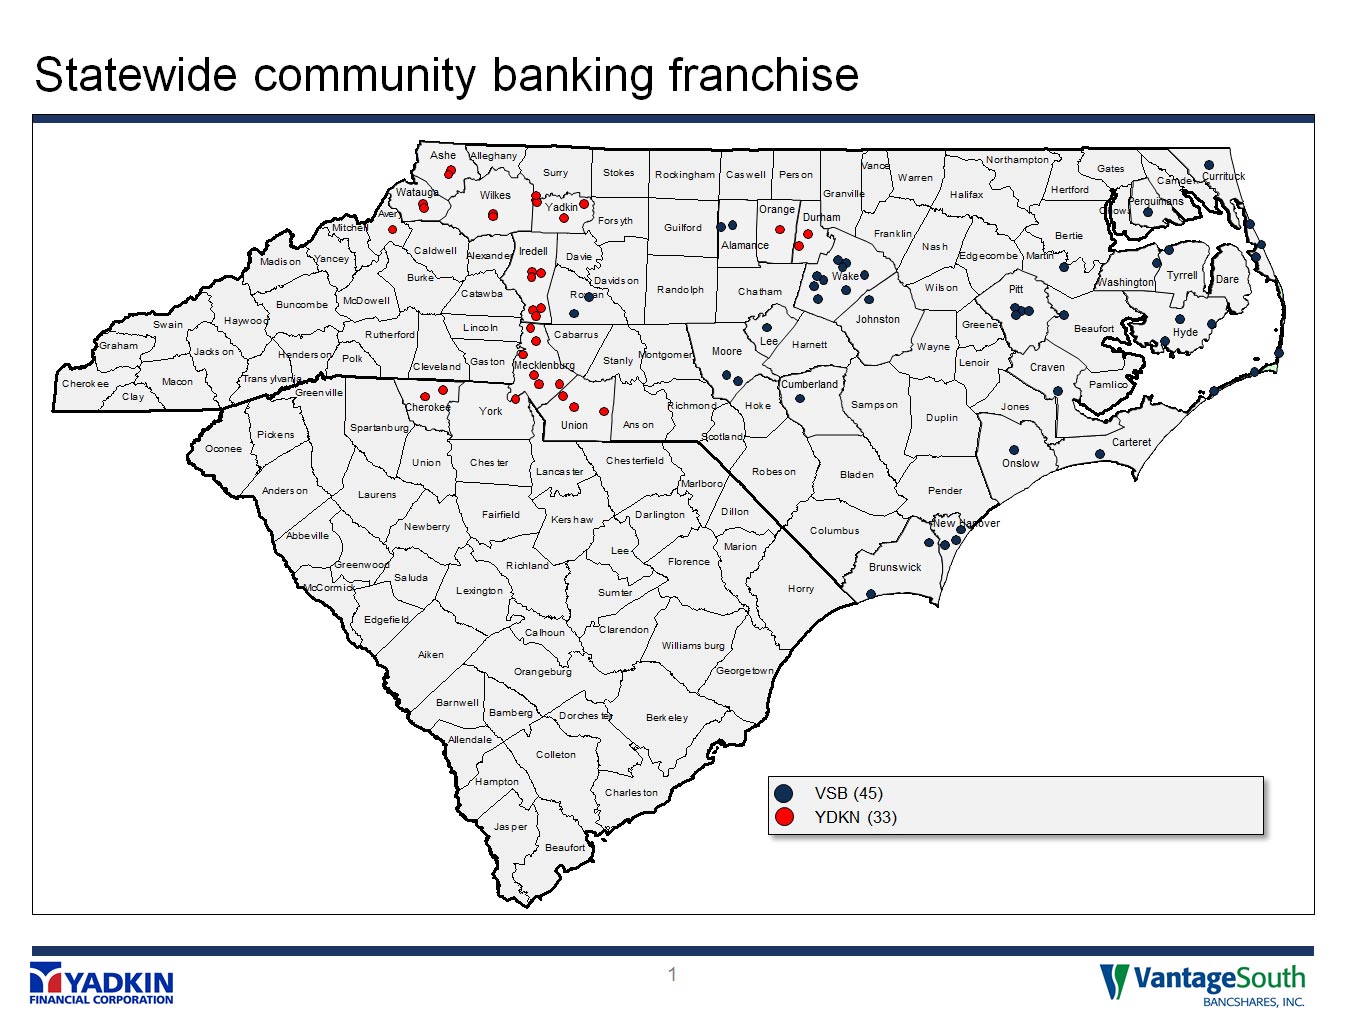 Statewide Combined Branches